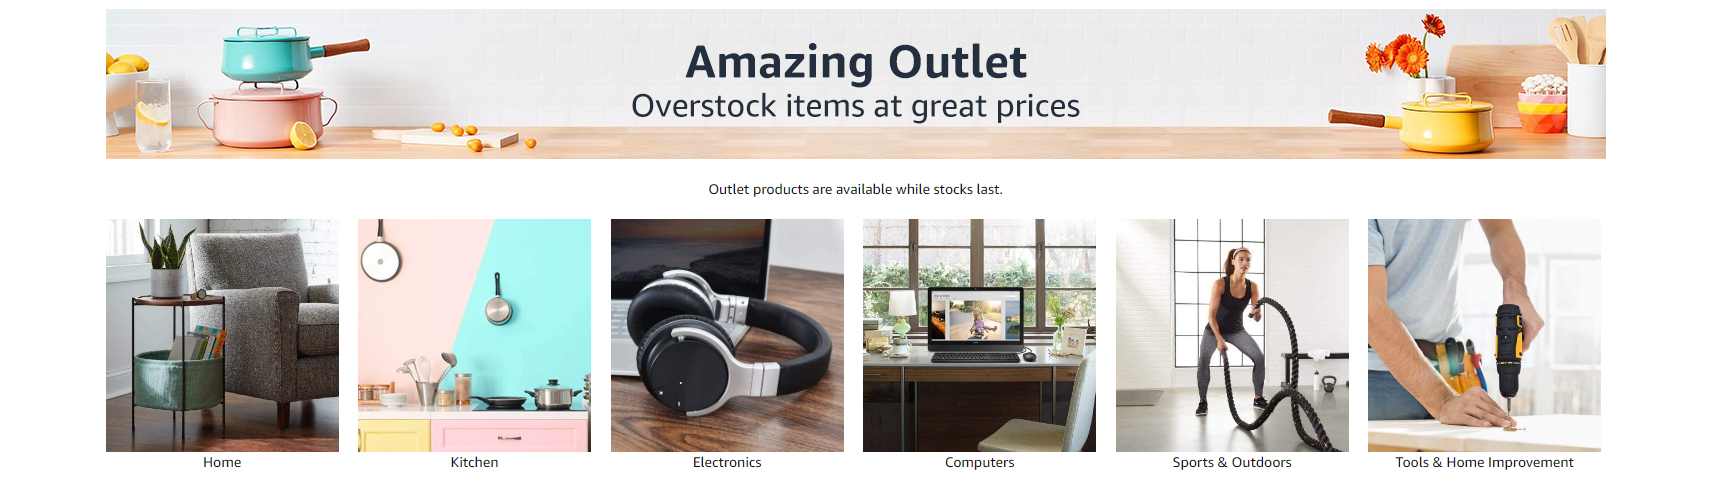 Up to 80% OFF Amazon Outlet items from beauty, kitchen, clothing, books, automotive & more